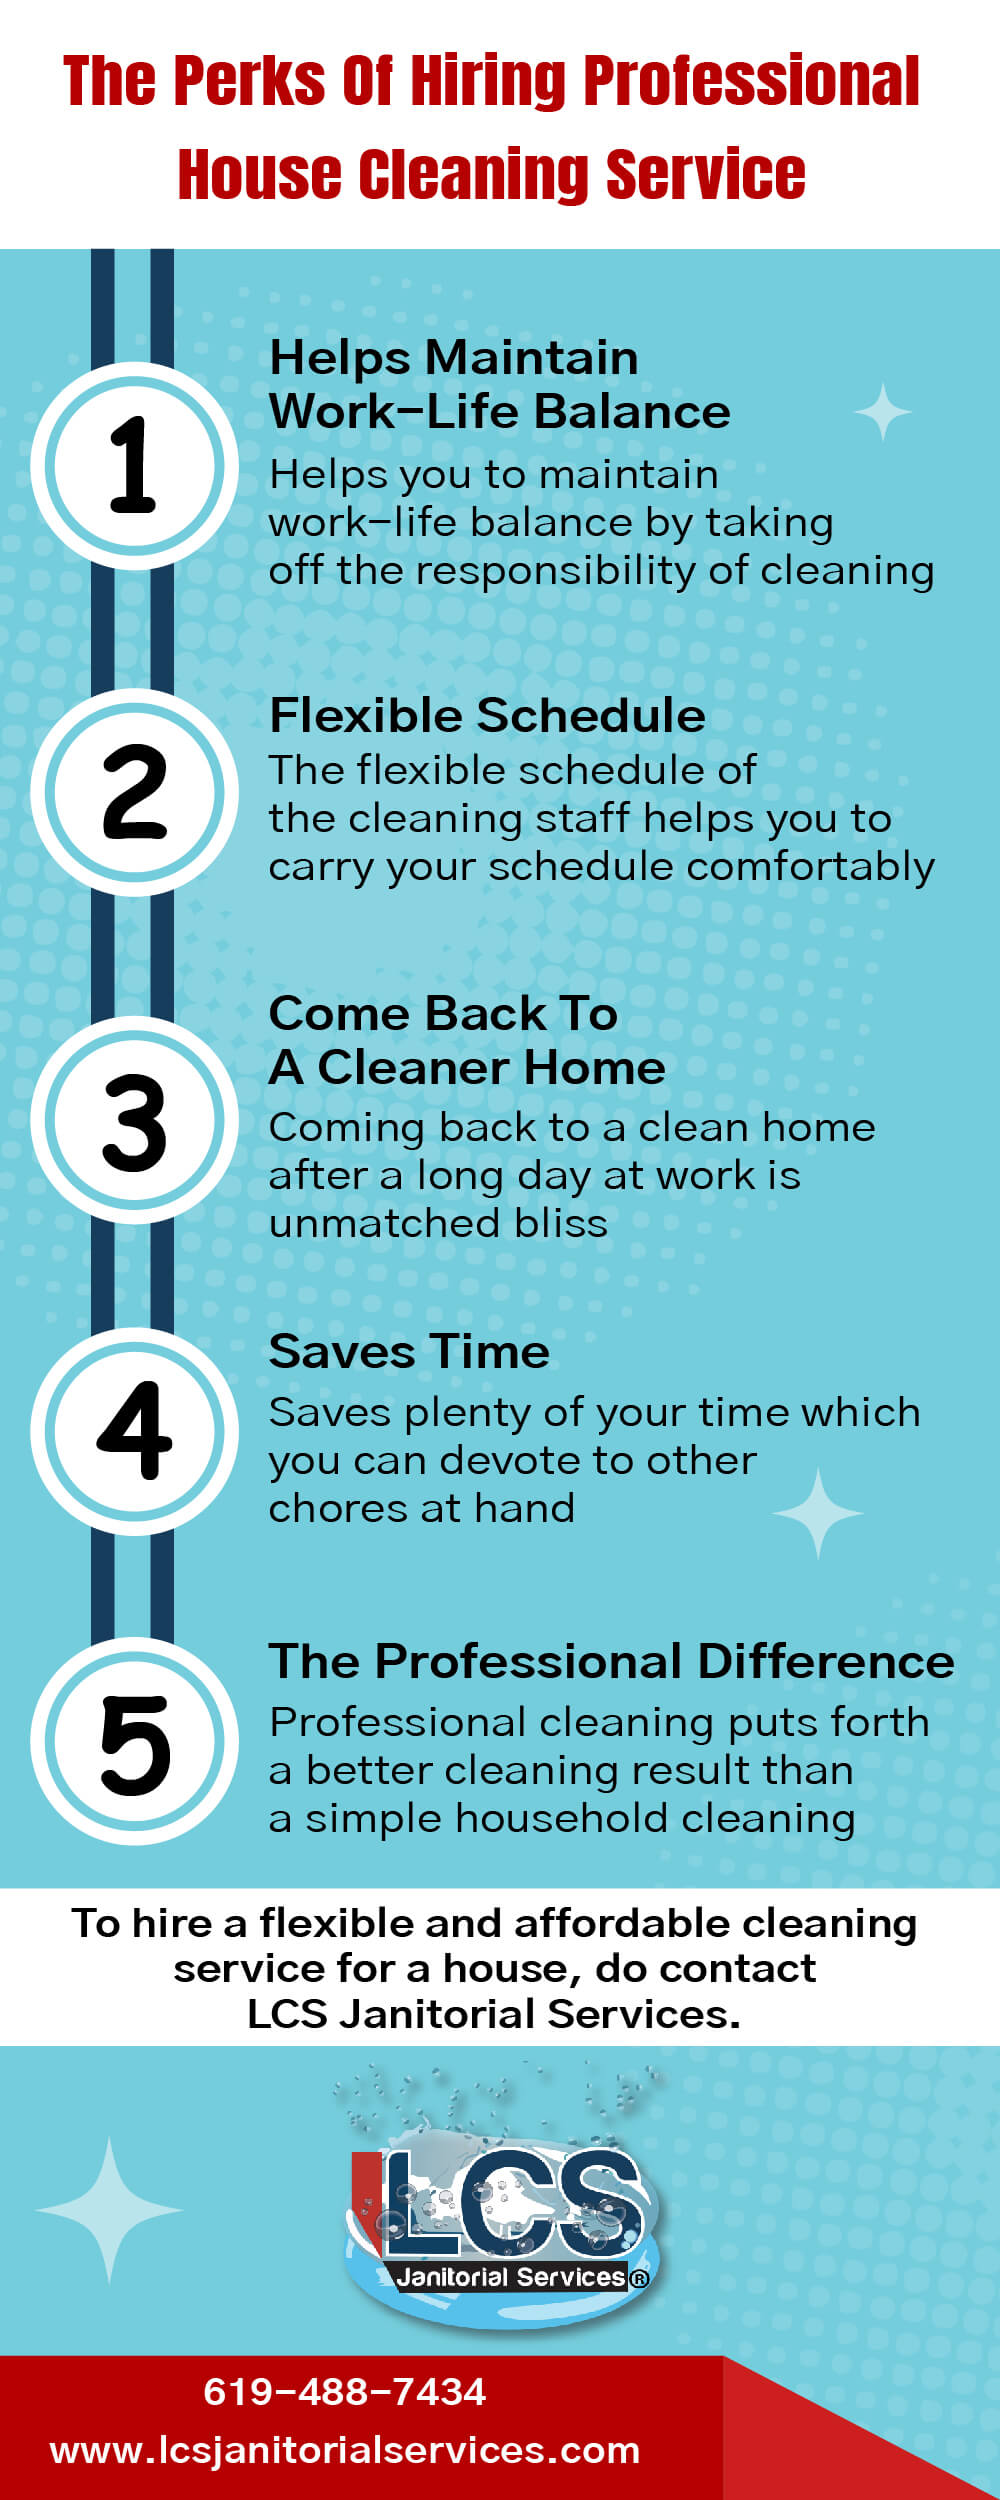 The Perks Of Hiring Professional House Cleaning Service_